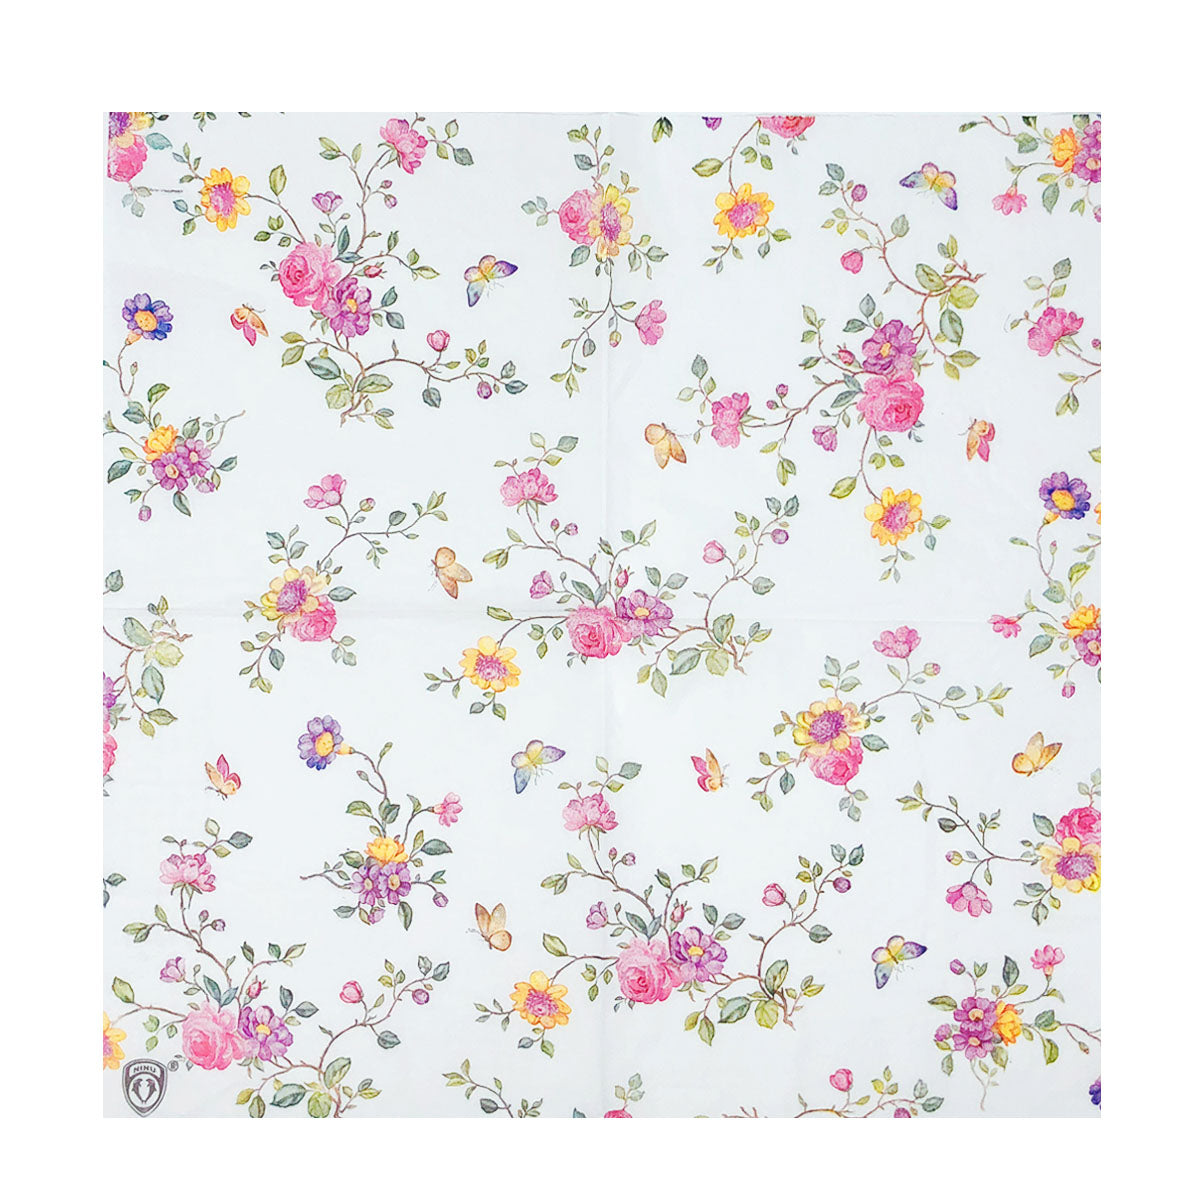 Wrapables Floral 2 Ply Paper Napkins (40 Count) for Wedding, Dinner Party, Tea Party, Decorative Decoupage